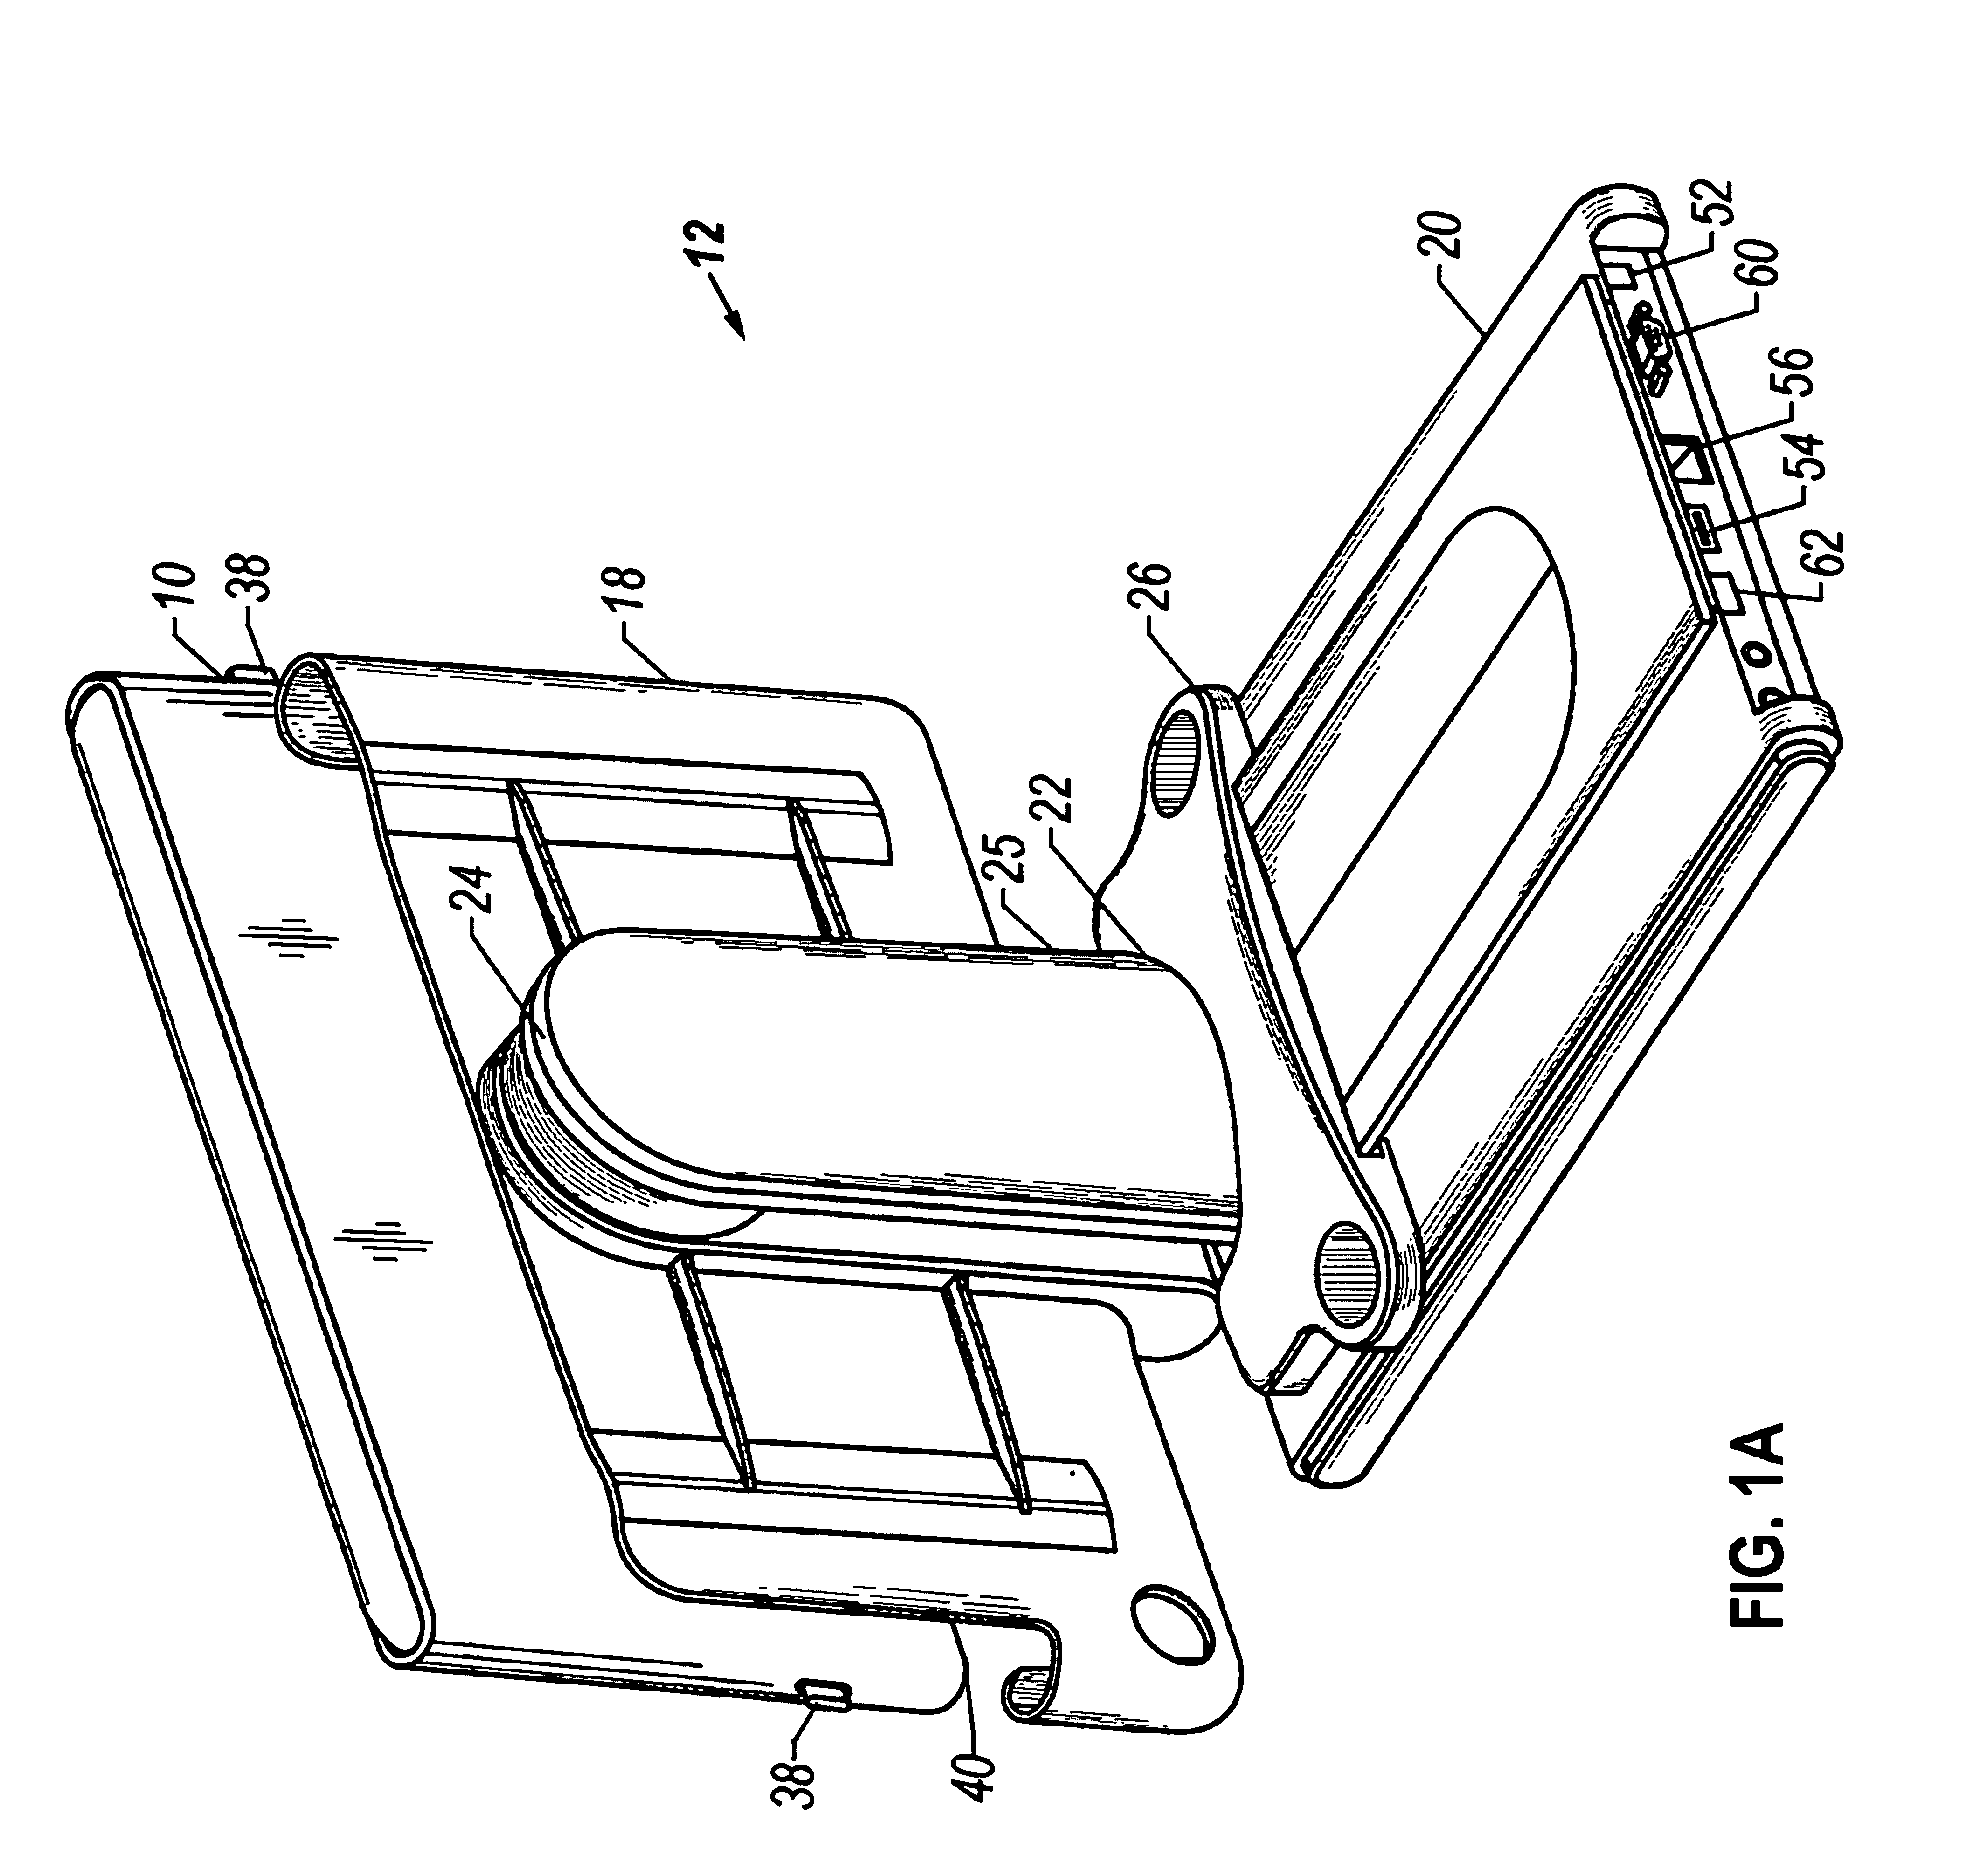 Docking support for a tablet computer with extended battery